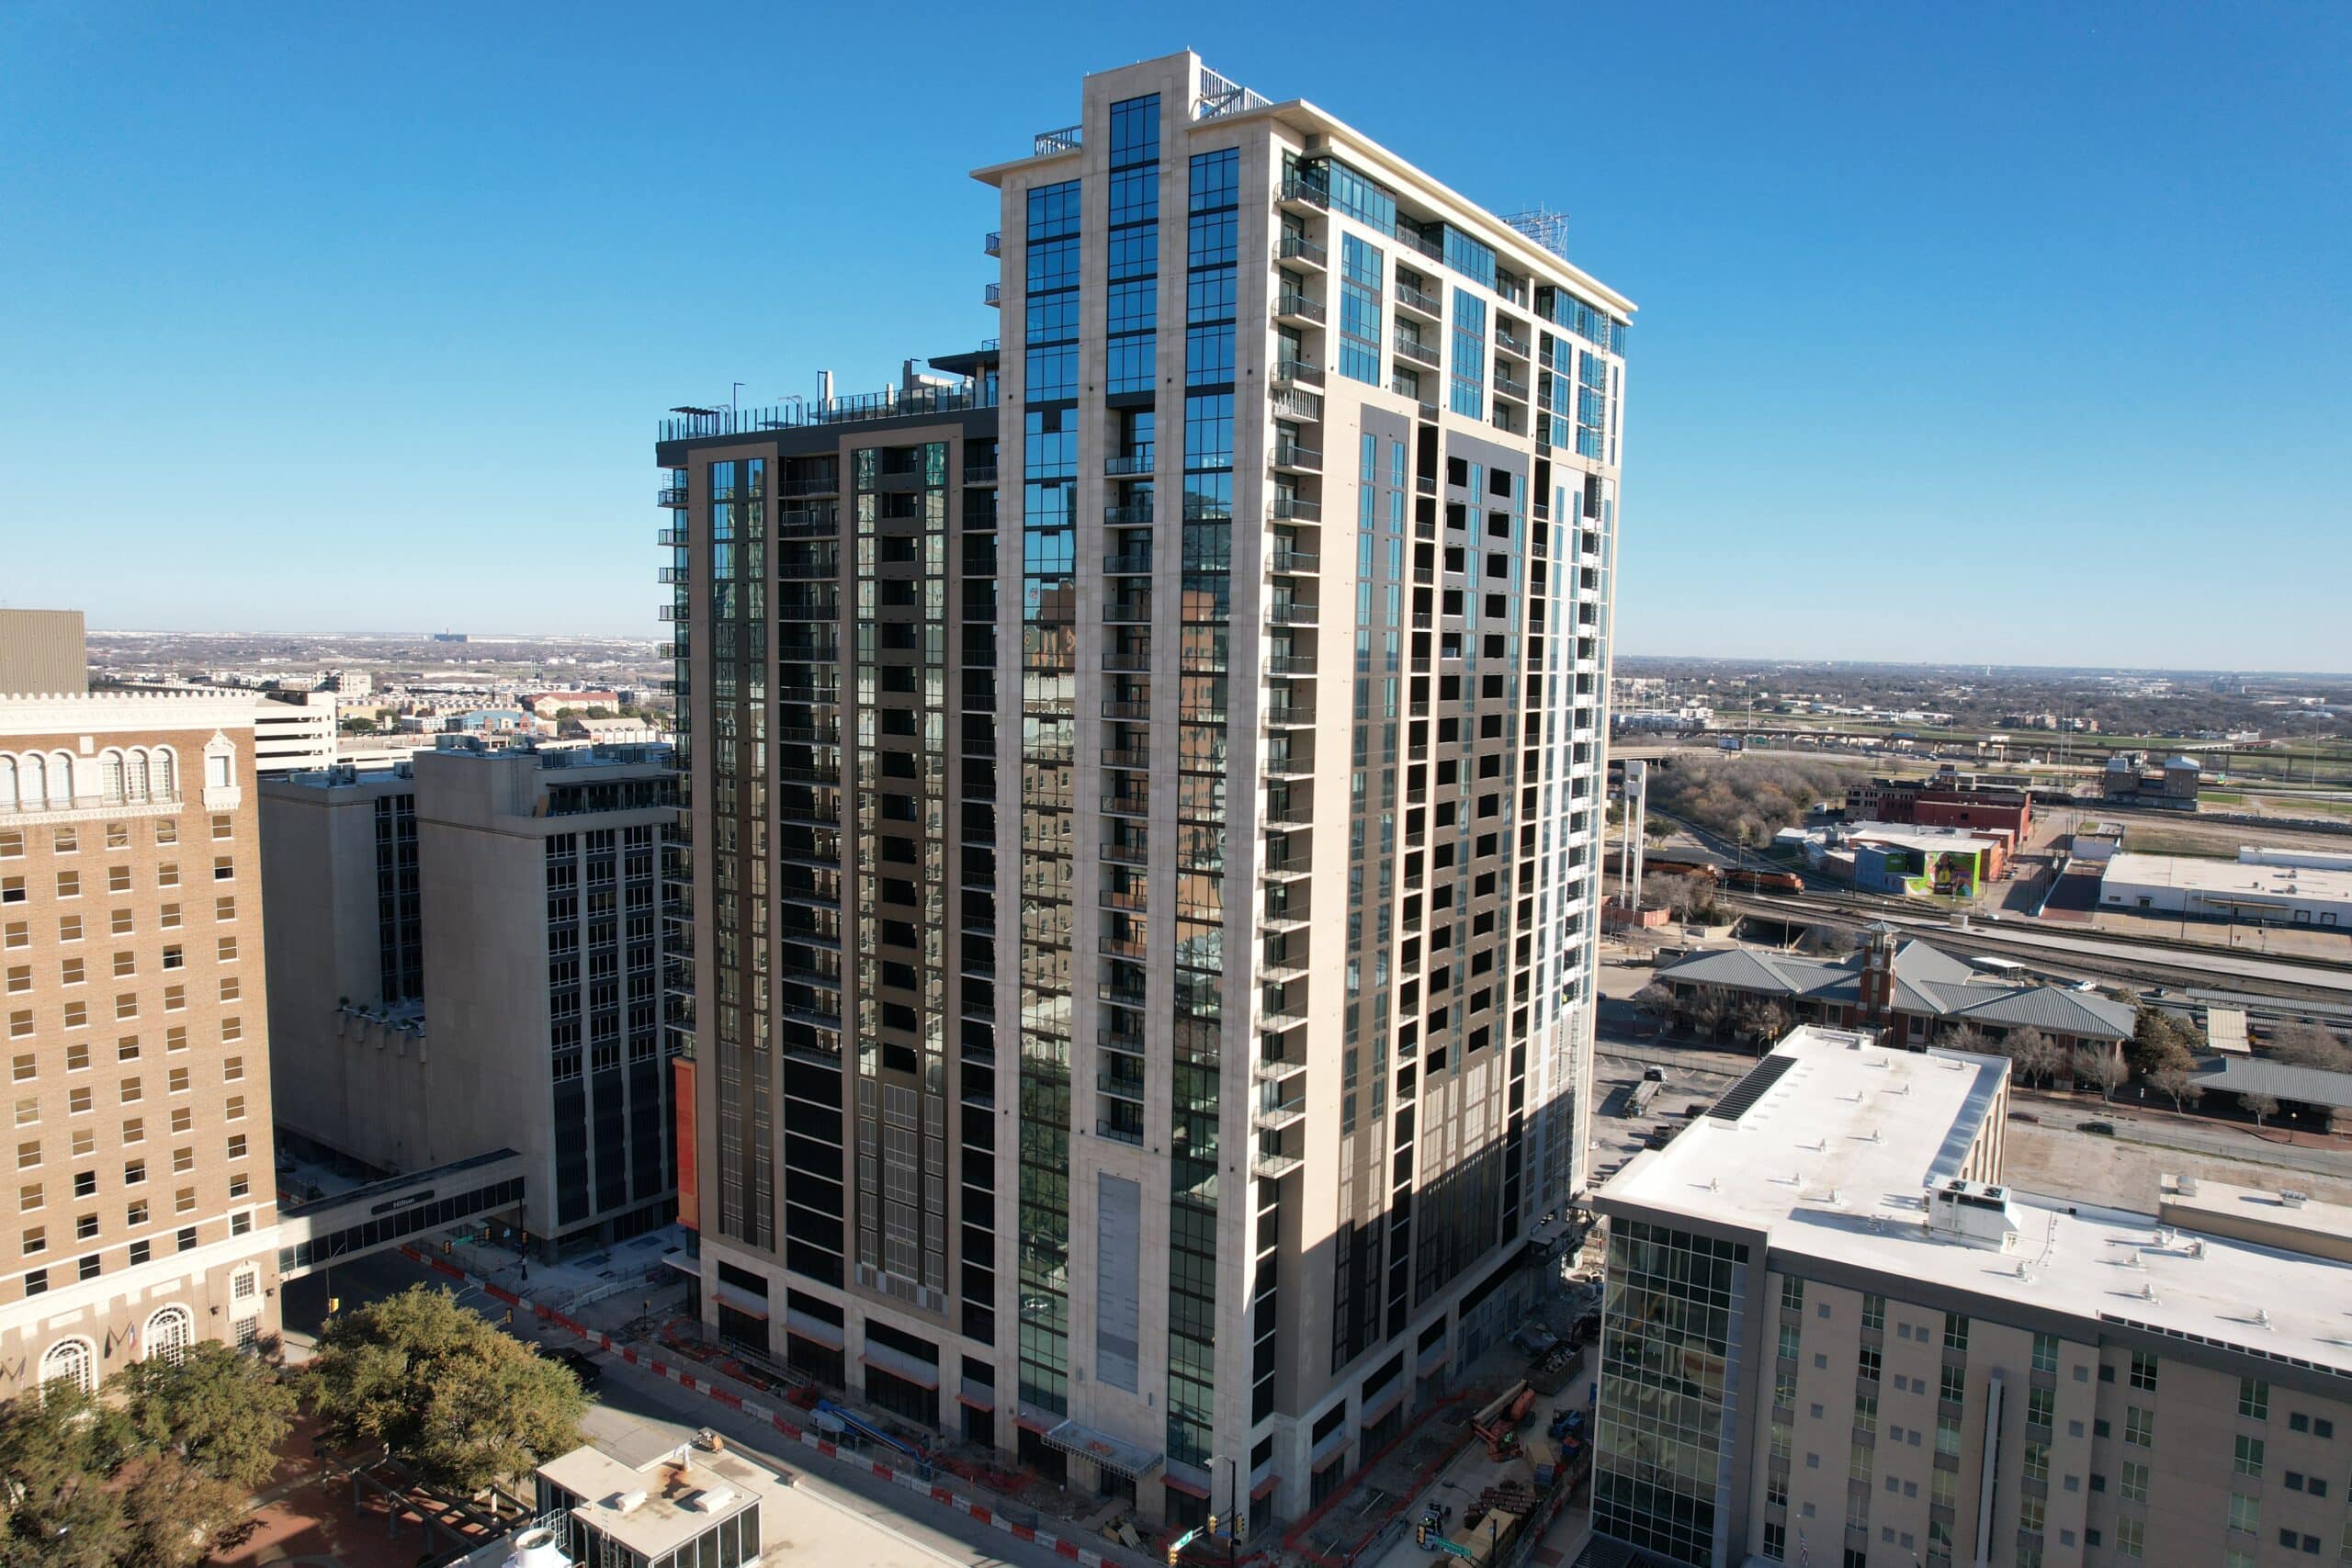 Exterior image of Deco luxury apartments in downtown Fort Worth